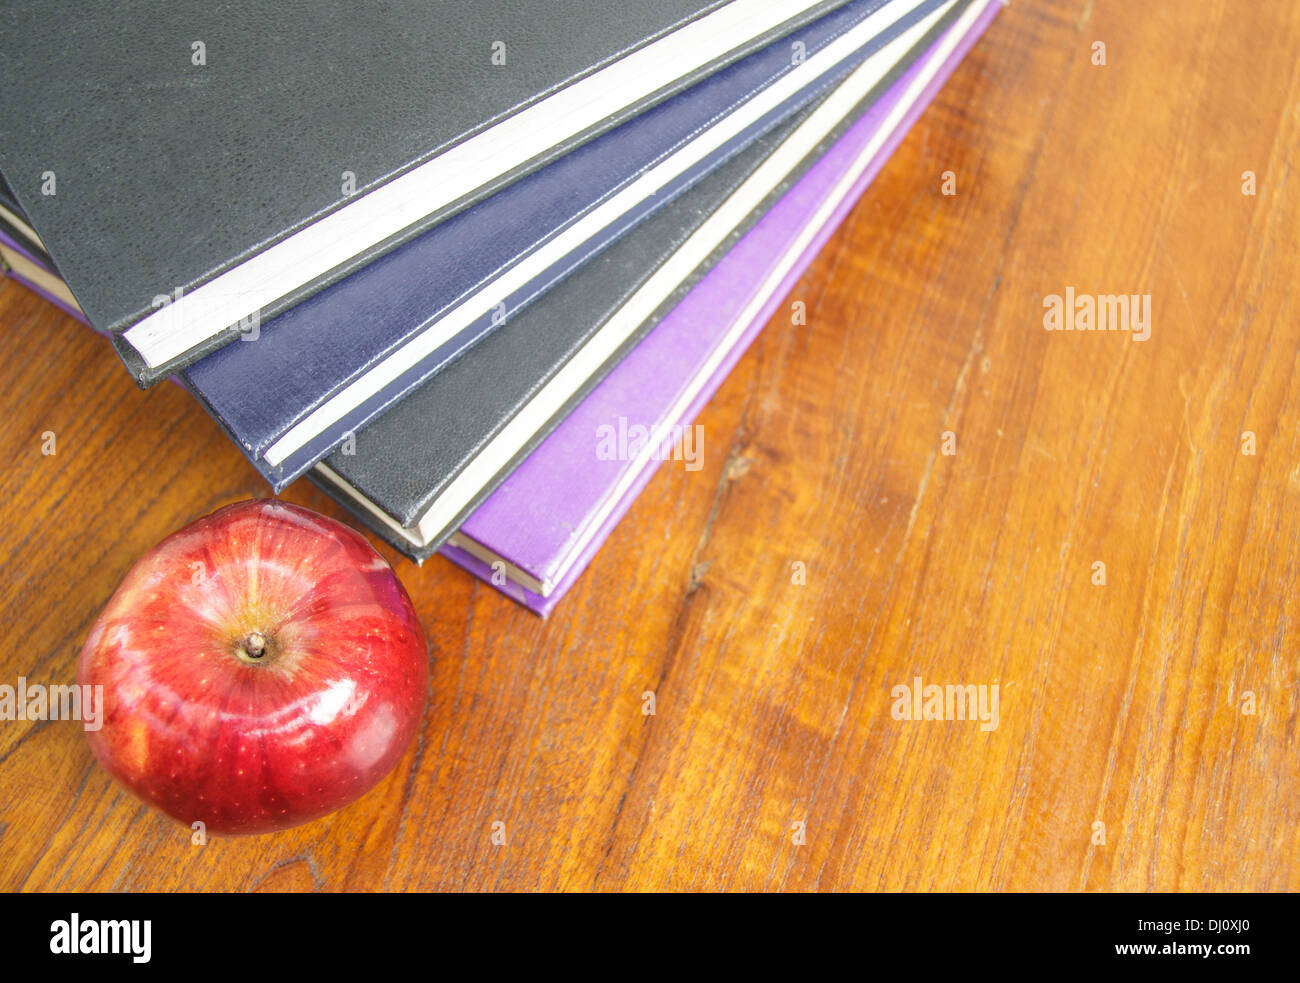 red apple and old books on wooden table top Stock Photo